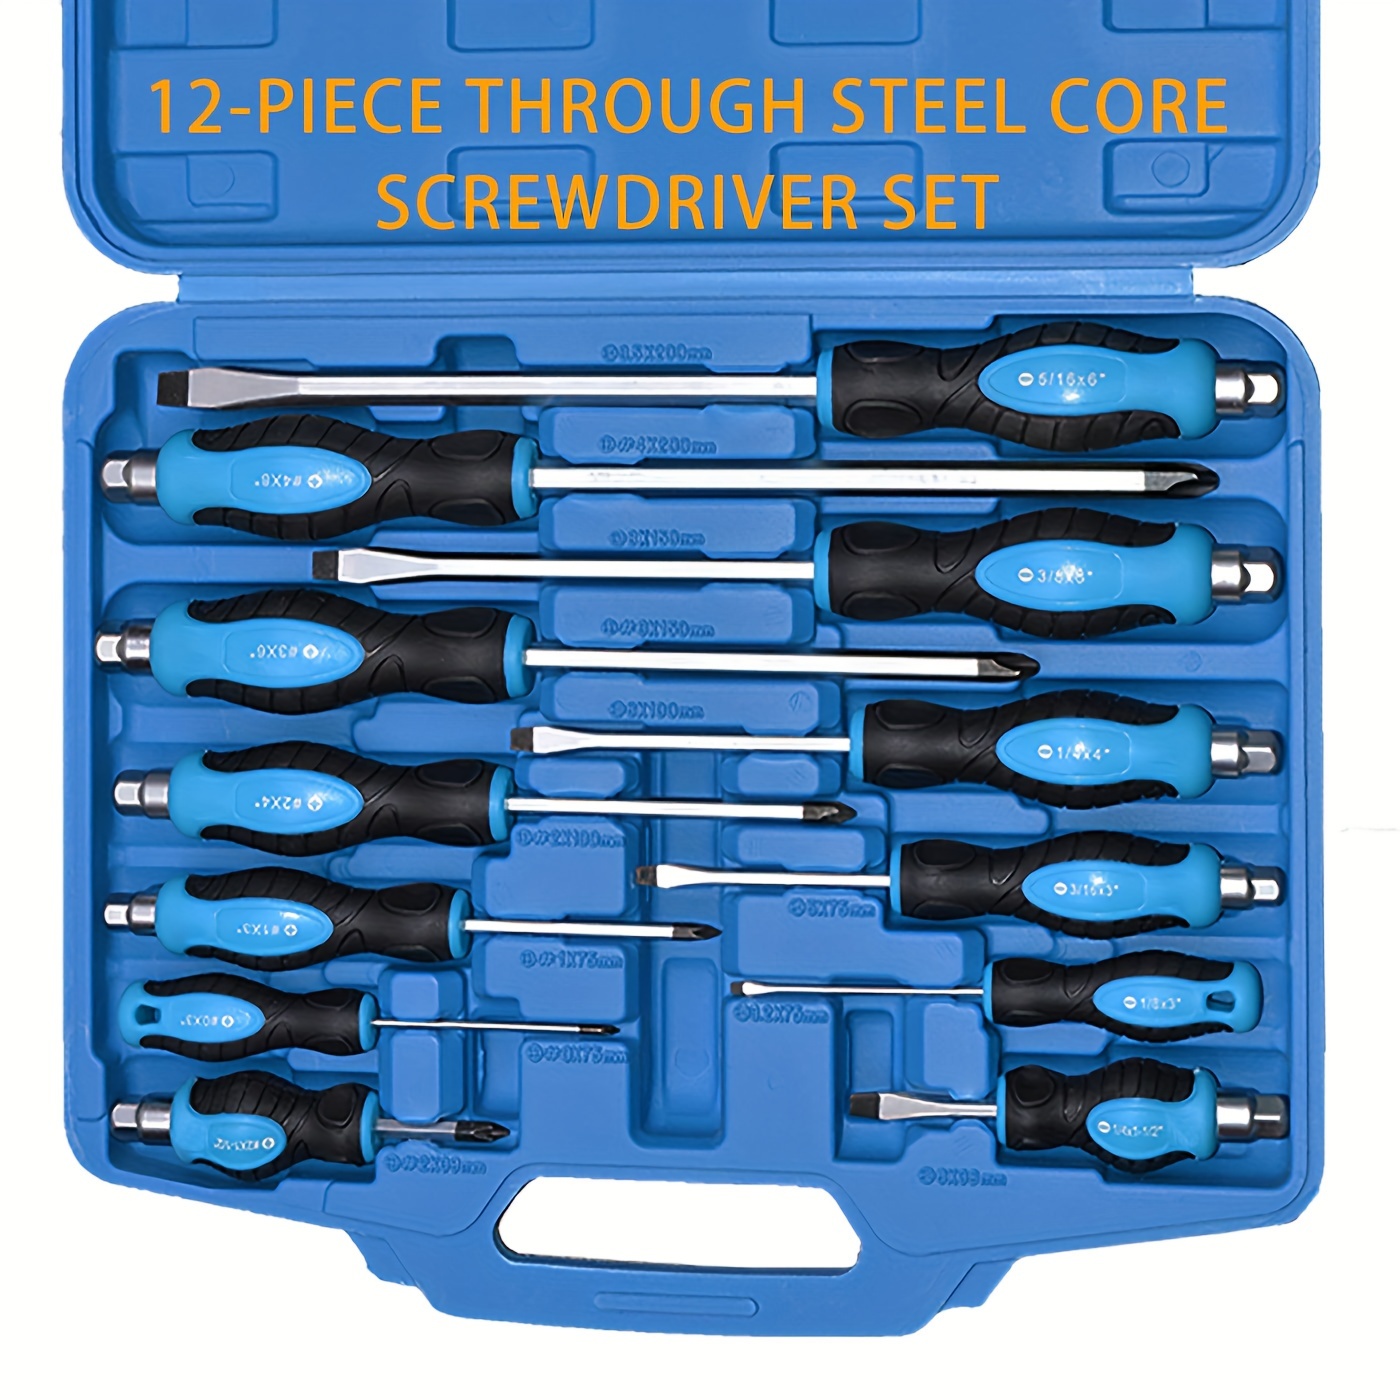 

12-piece Through Steel Core Screwdriver Set, Go-thru Steel Blade High Torque For Fastening, Chiseling Or Loosening Screws, 6 Phillips& 6 Slotted Magnetic Bit, With Carry Case